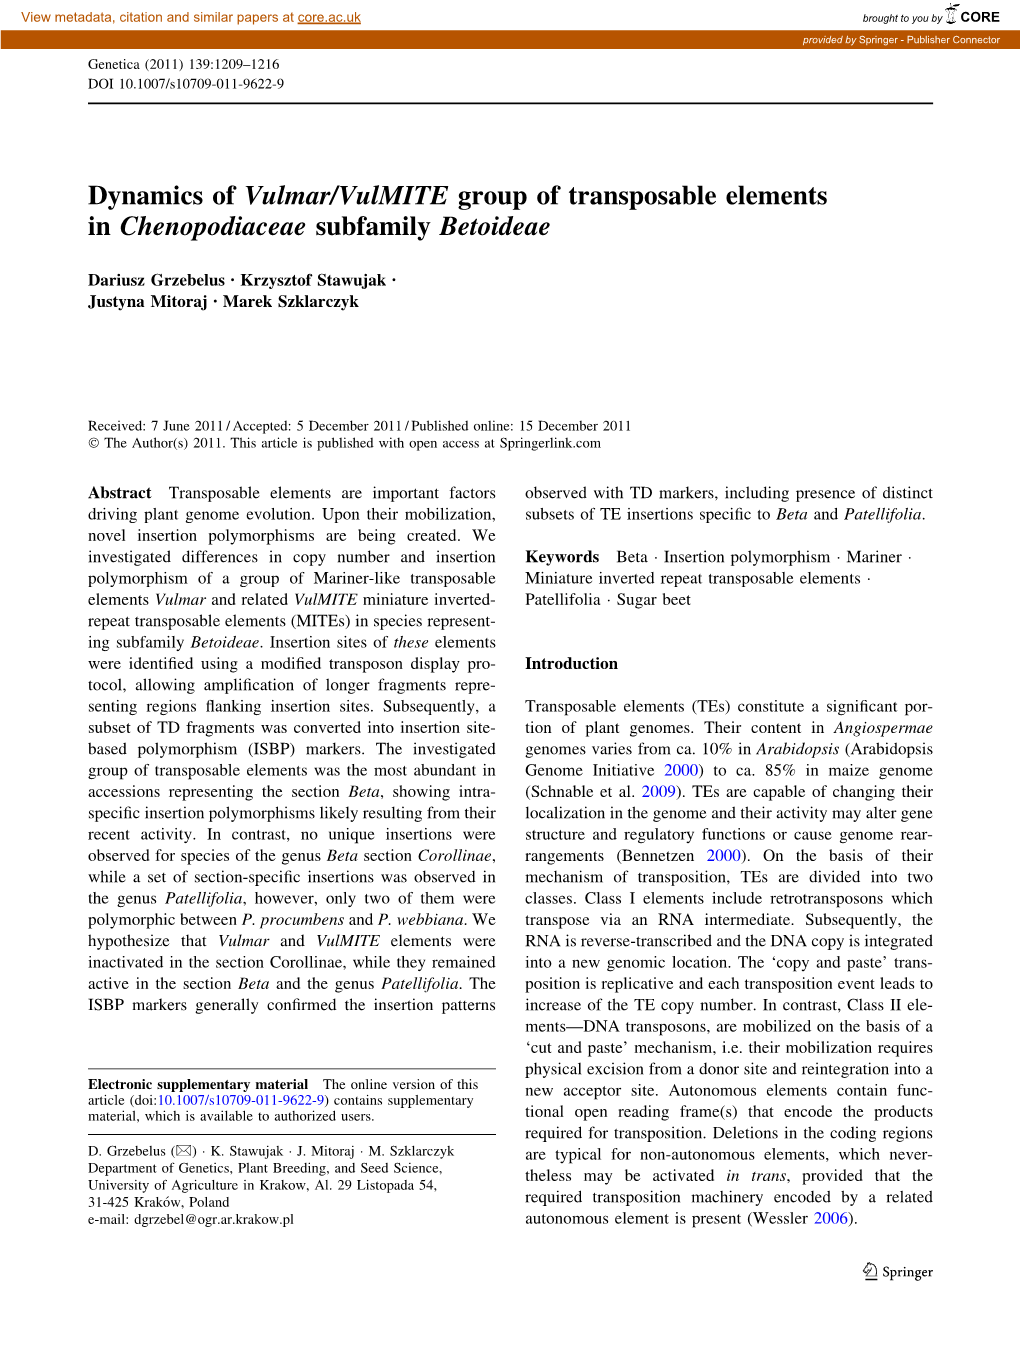 Dynamics of Vulmar/Vulmite Group of Transposable Elements in Chenopodiaceae Subfamily Betoideae